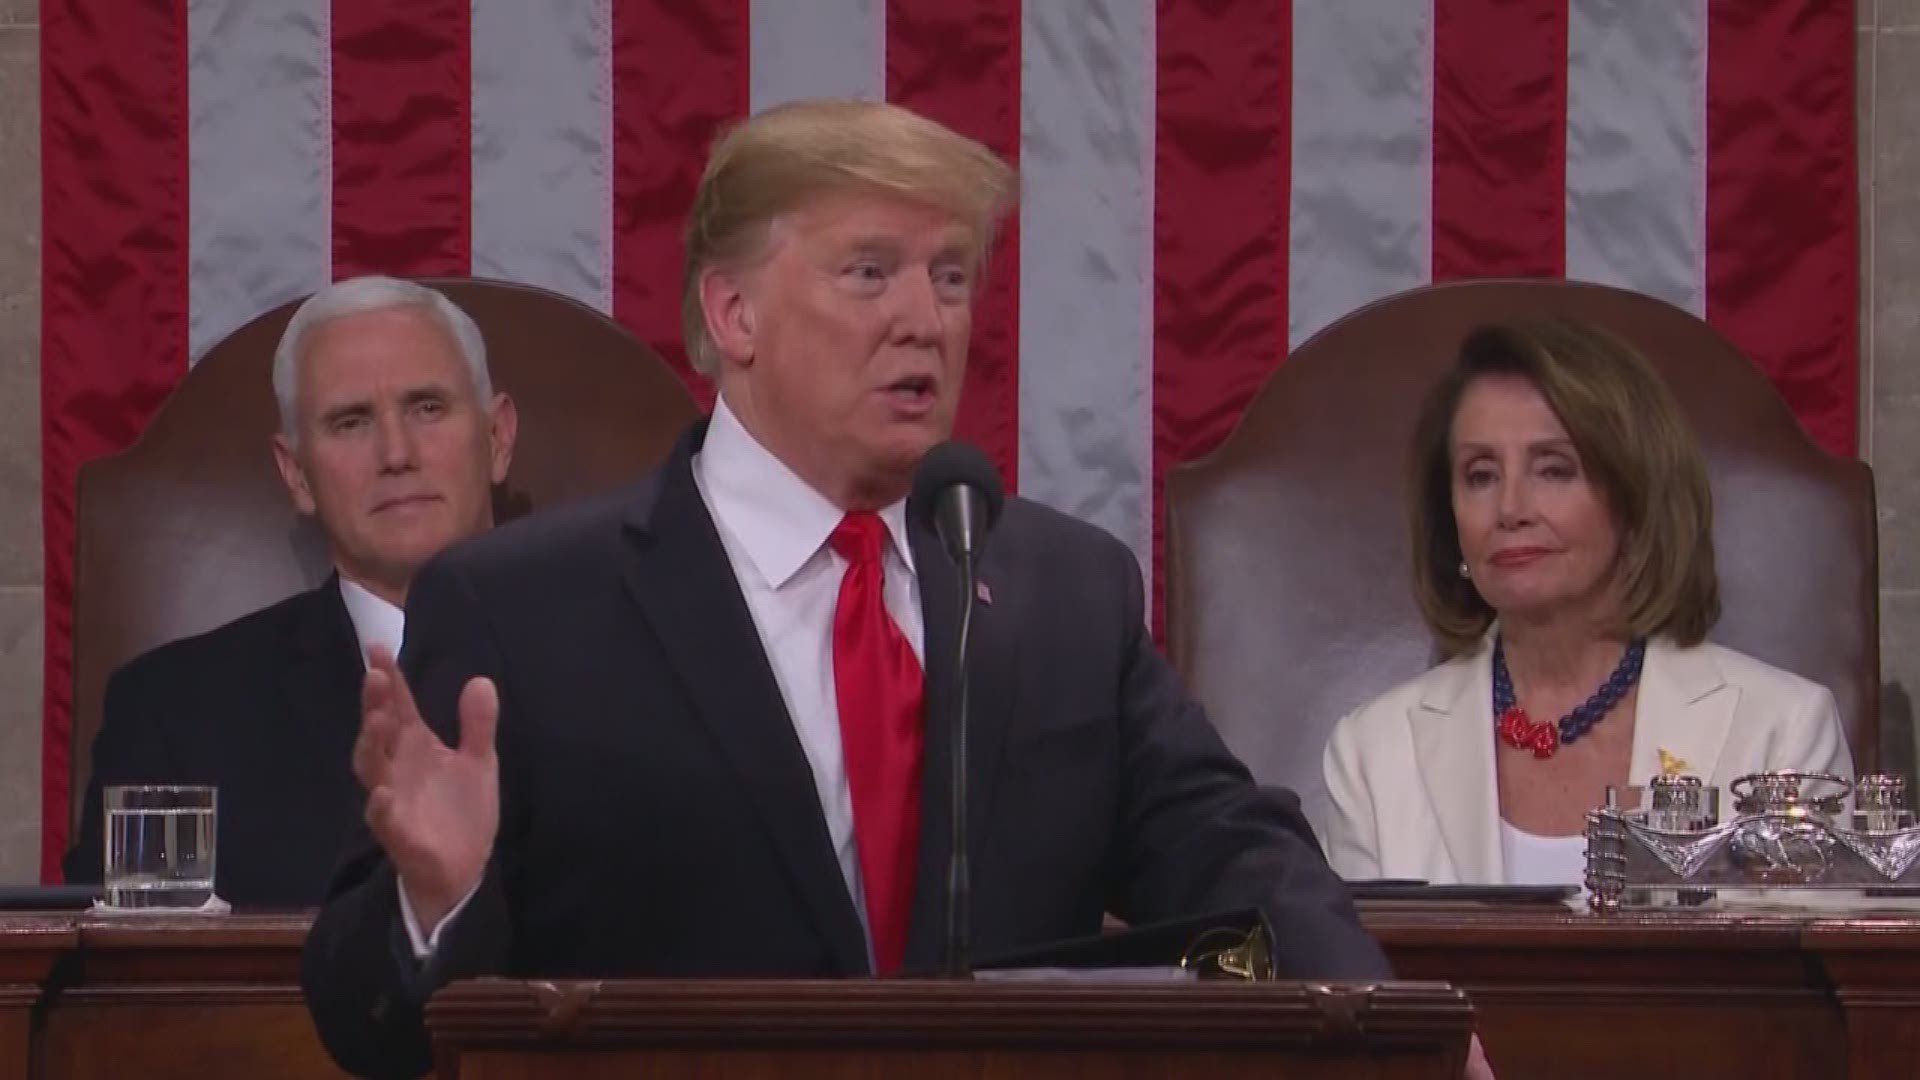 "If there is going to be peace and legislation, there cannot be war and investigation.  It just doesn't work that way!" President Trump said during the State of the Union.